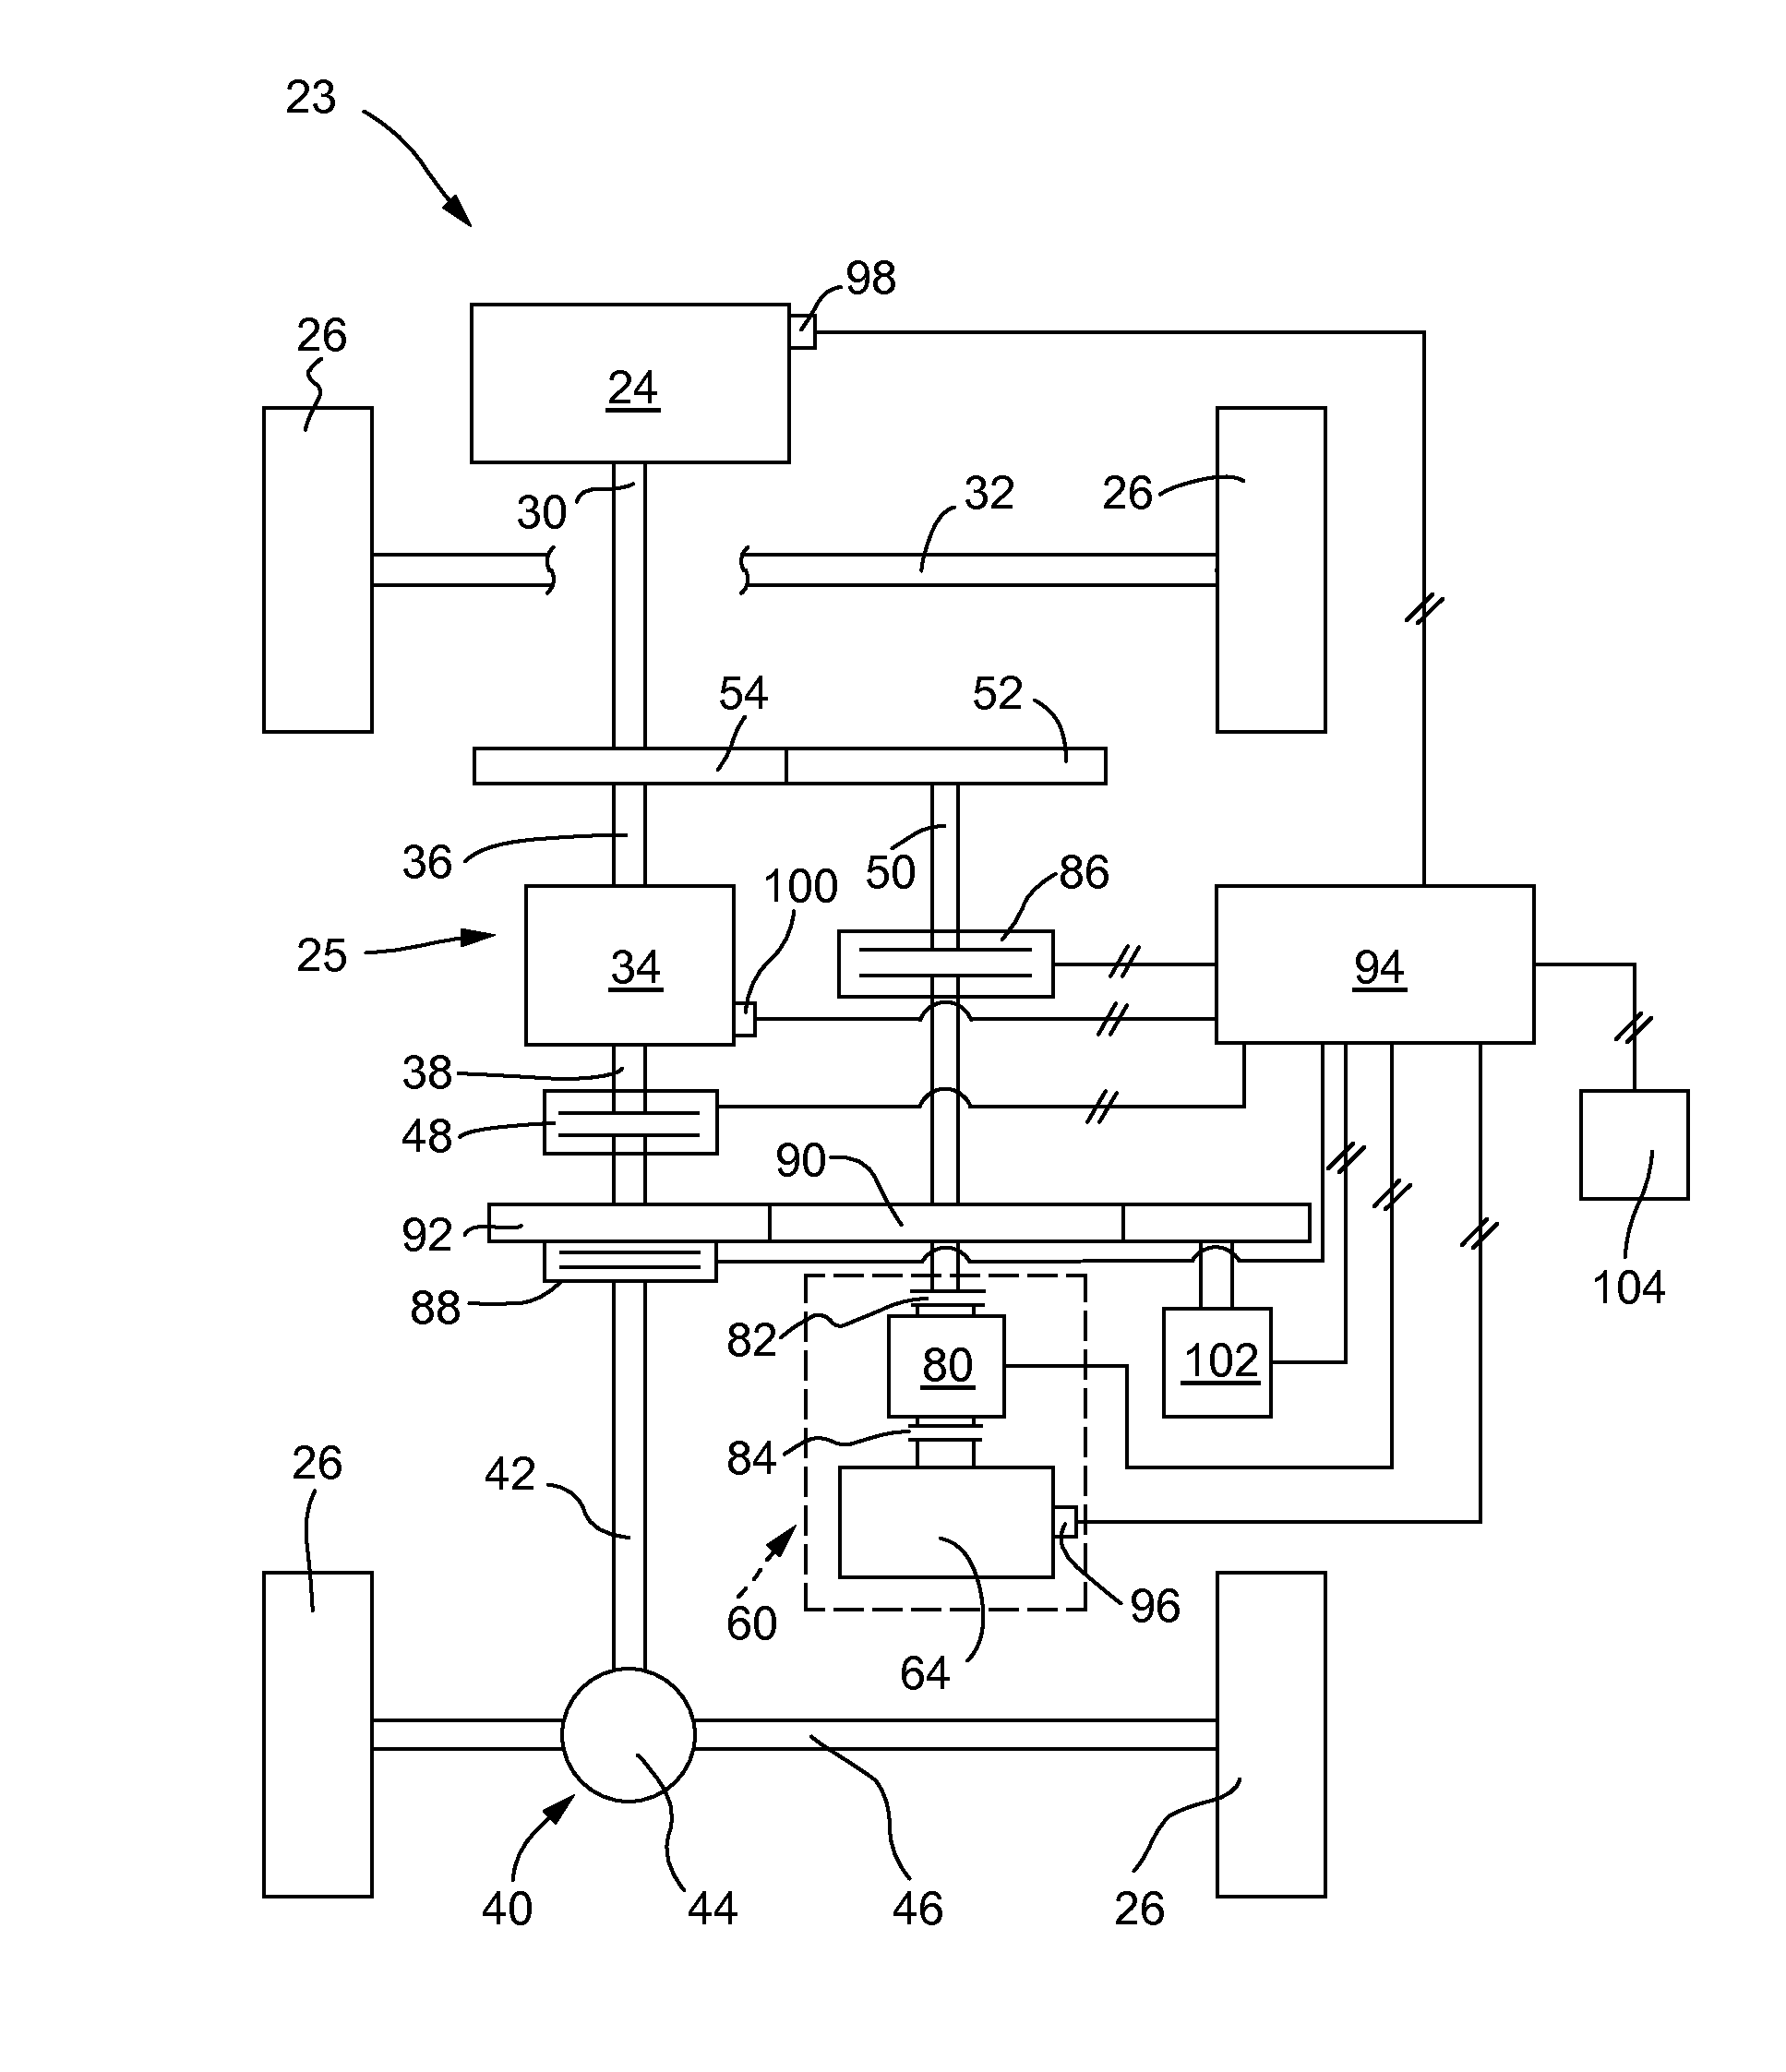 System and Method for Efficiently Operating Multiple Flywheels